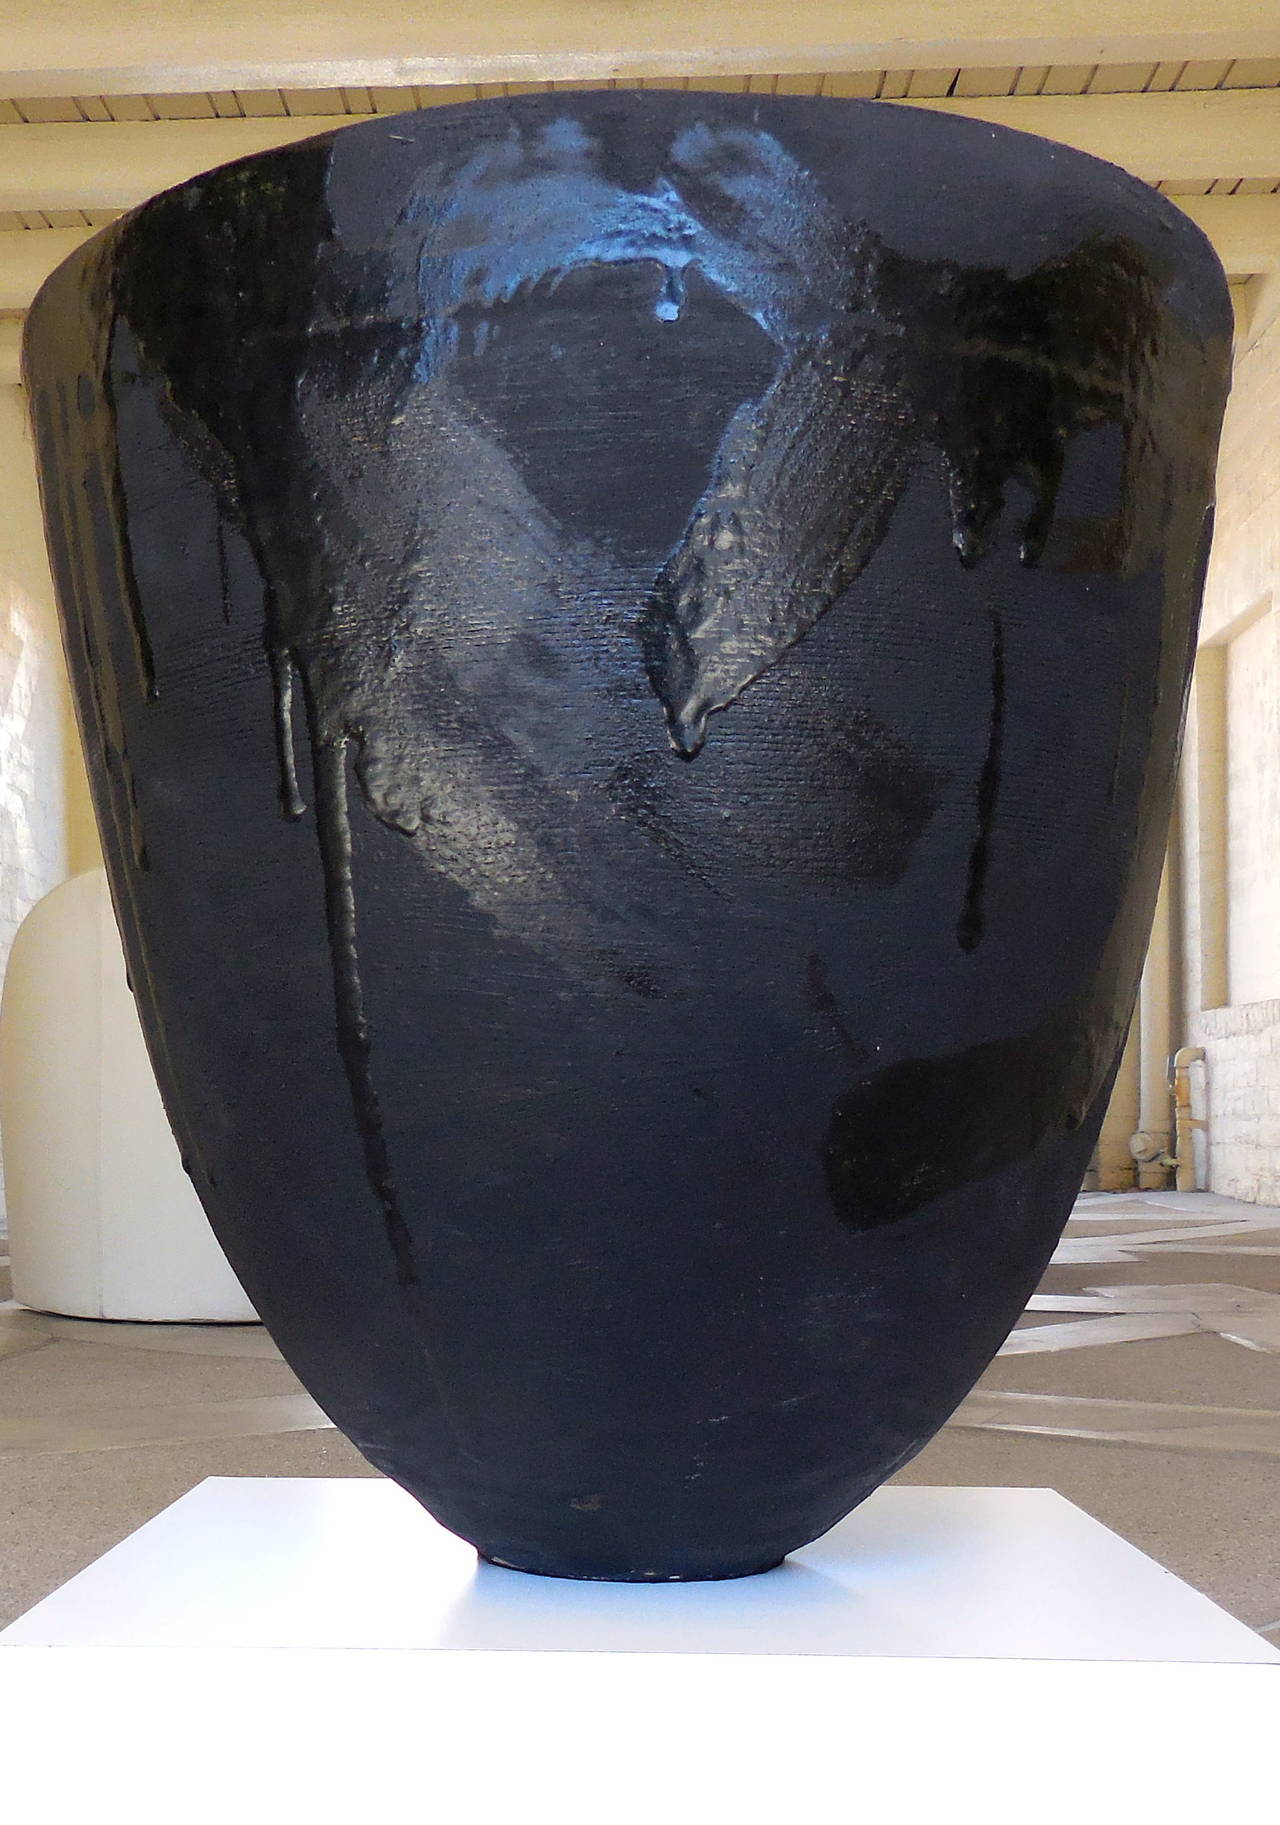 A large-scaled glazed ceramic vessel by American Master Darcy Badiali. Nearly 1 1/2 feet tall, this impressive work of art was fired in the kiln at Cal State Fullerton. This particular vessel is redolent of the amazing pottery of the American